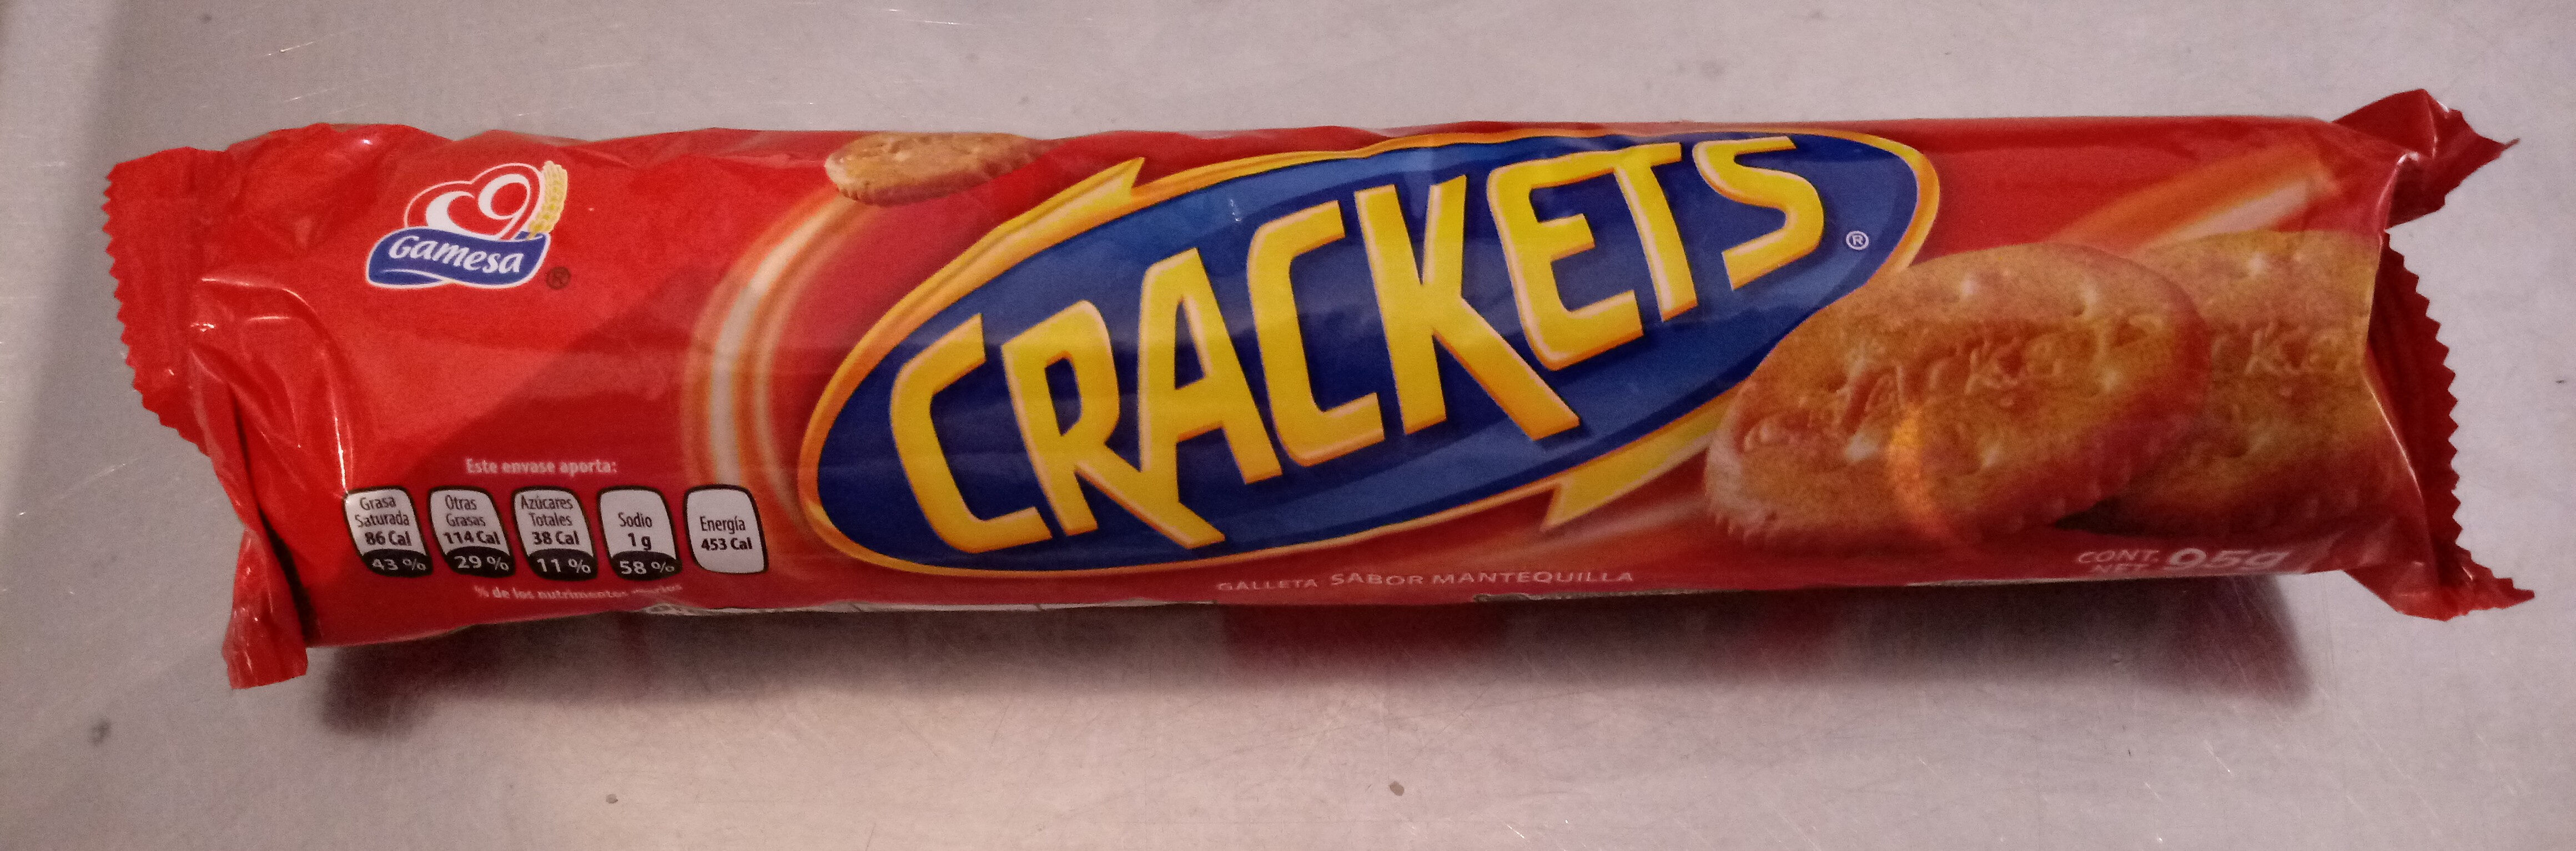 crackets - Producto